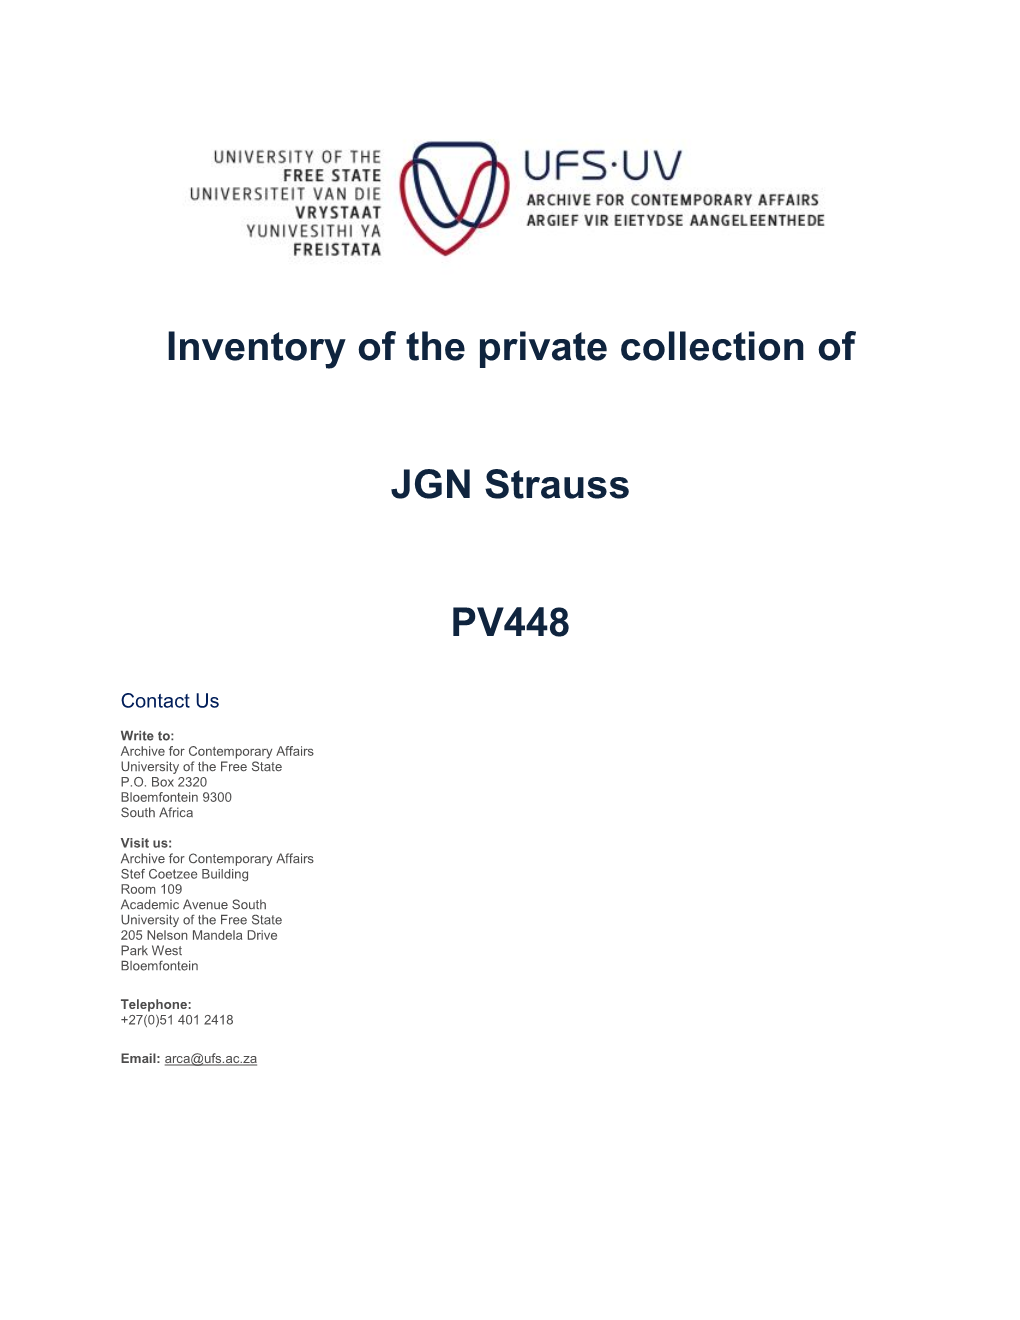 Inventory of the Private Collection of JGN Strauss PV448